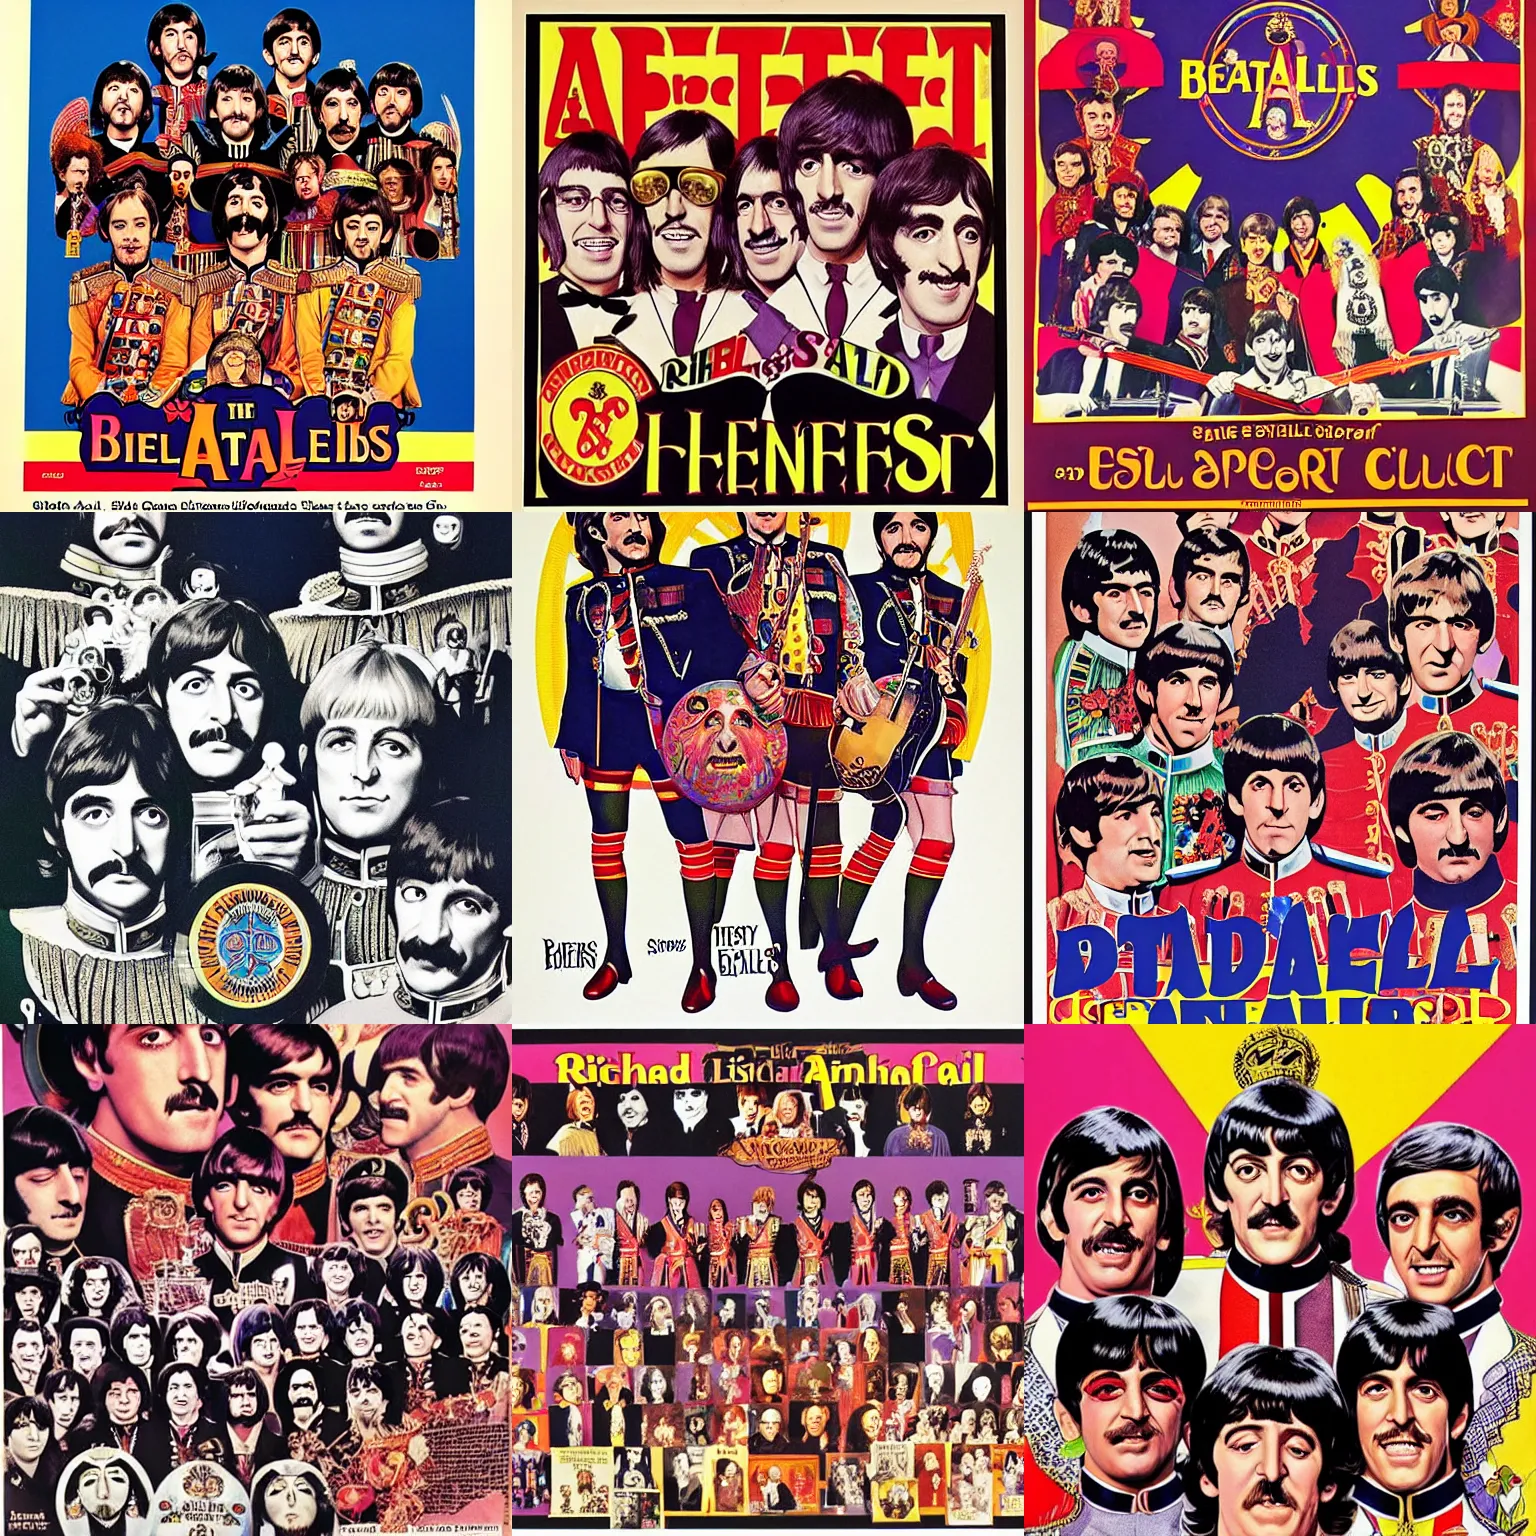 Prompt: richard amsel the beatles sgt pepper's!!! richard amsel!!! lonely hearts club band ( 1 9 6 7 ) album cover!!!!!!!!!!!!!!!!!!!!!!!!!!!!!! richard amsel